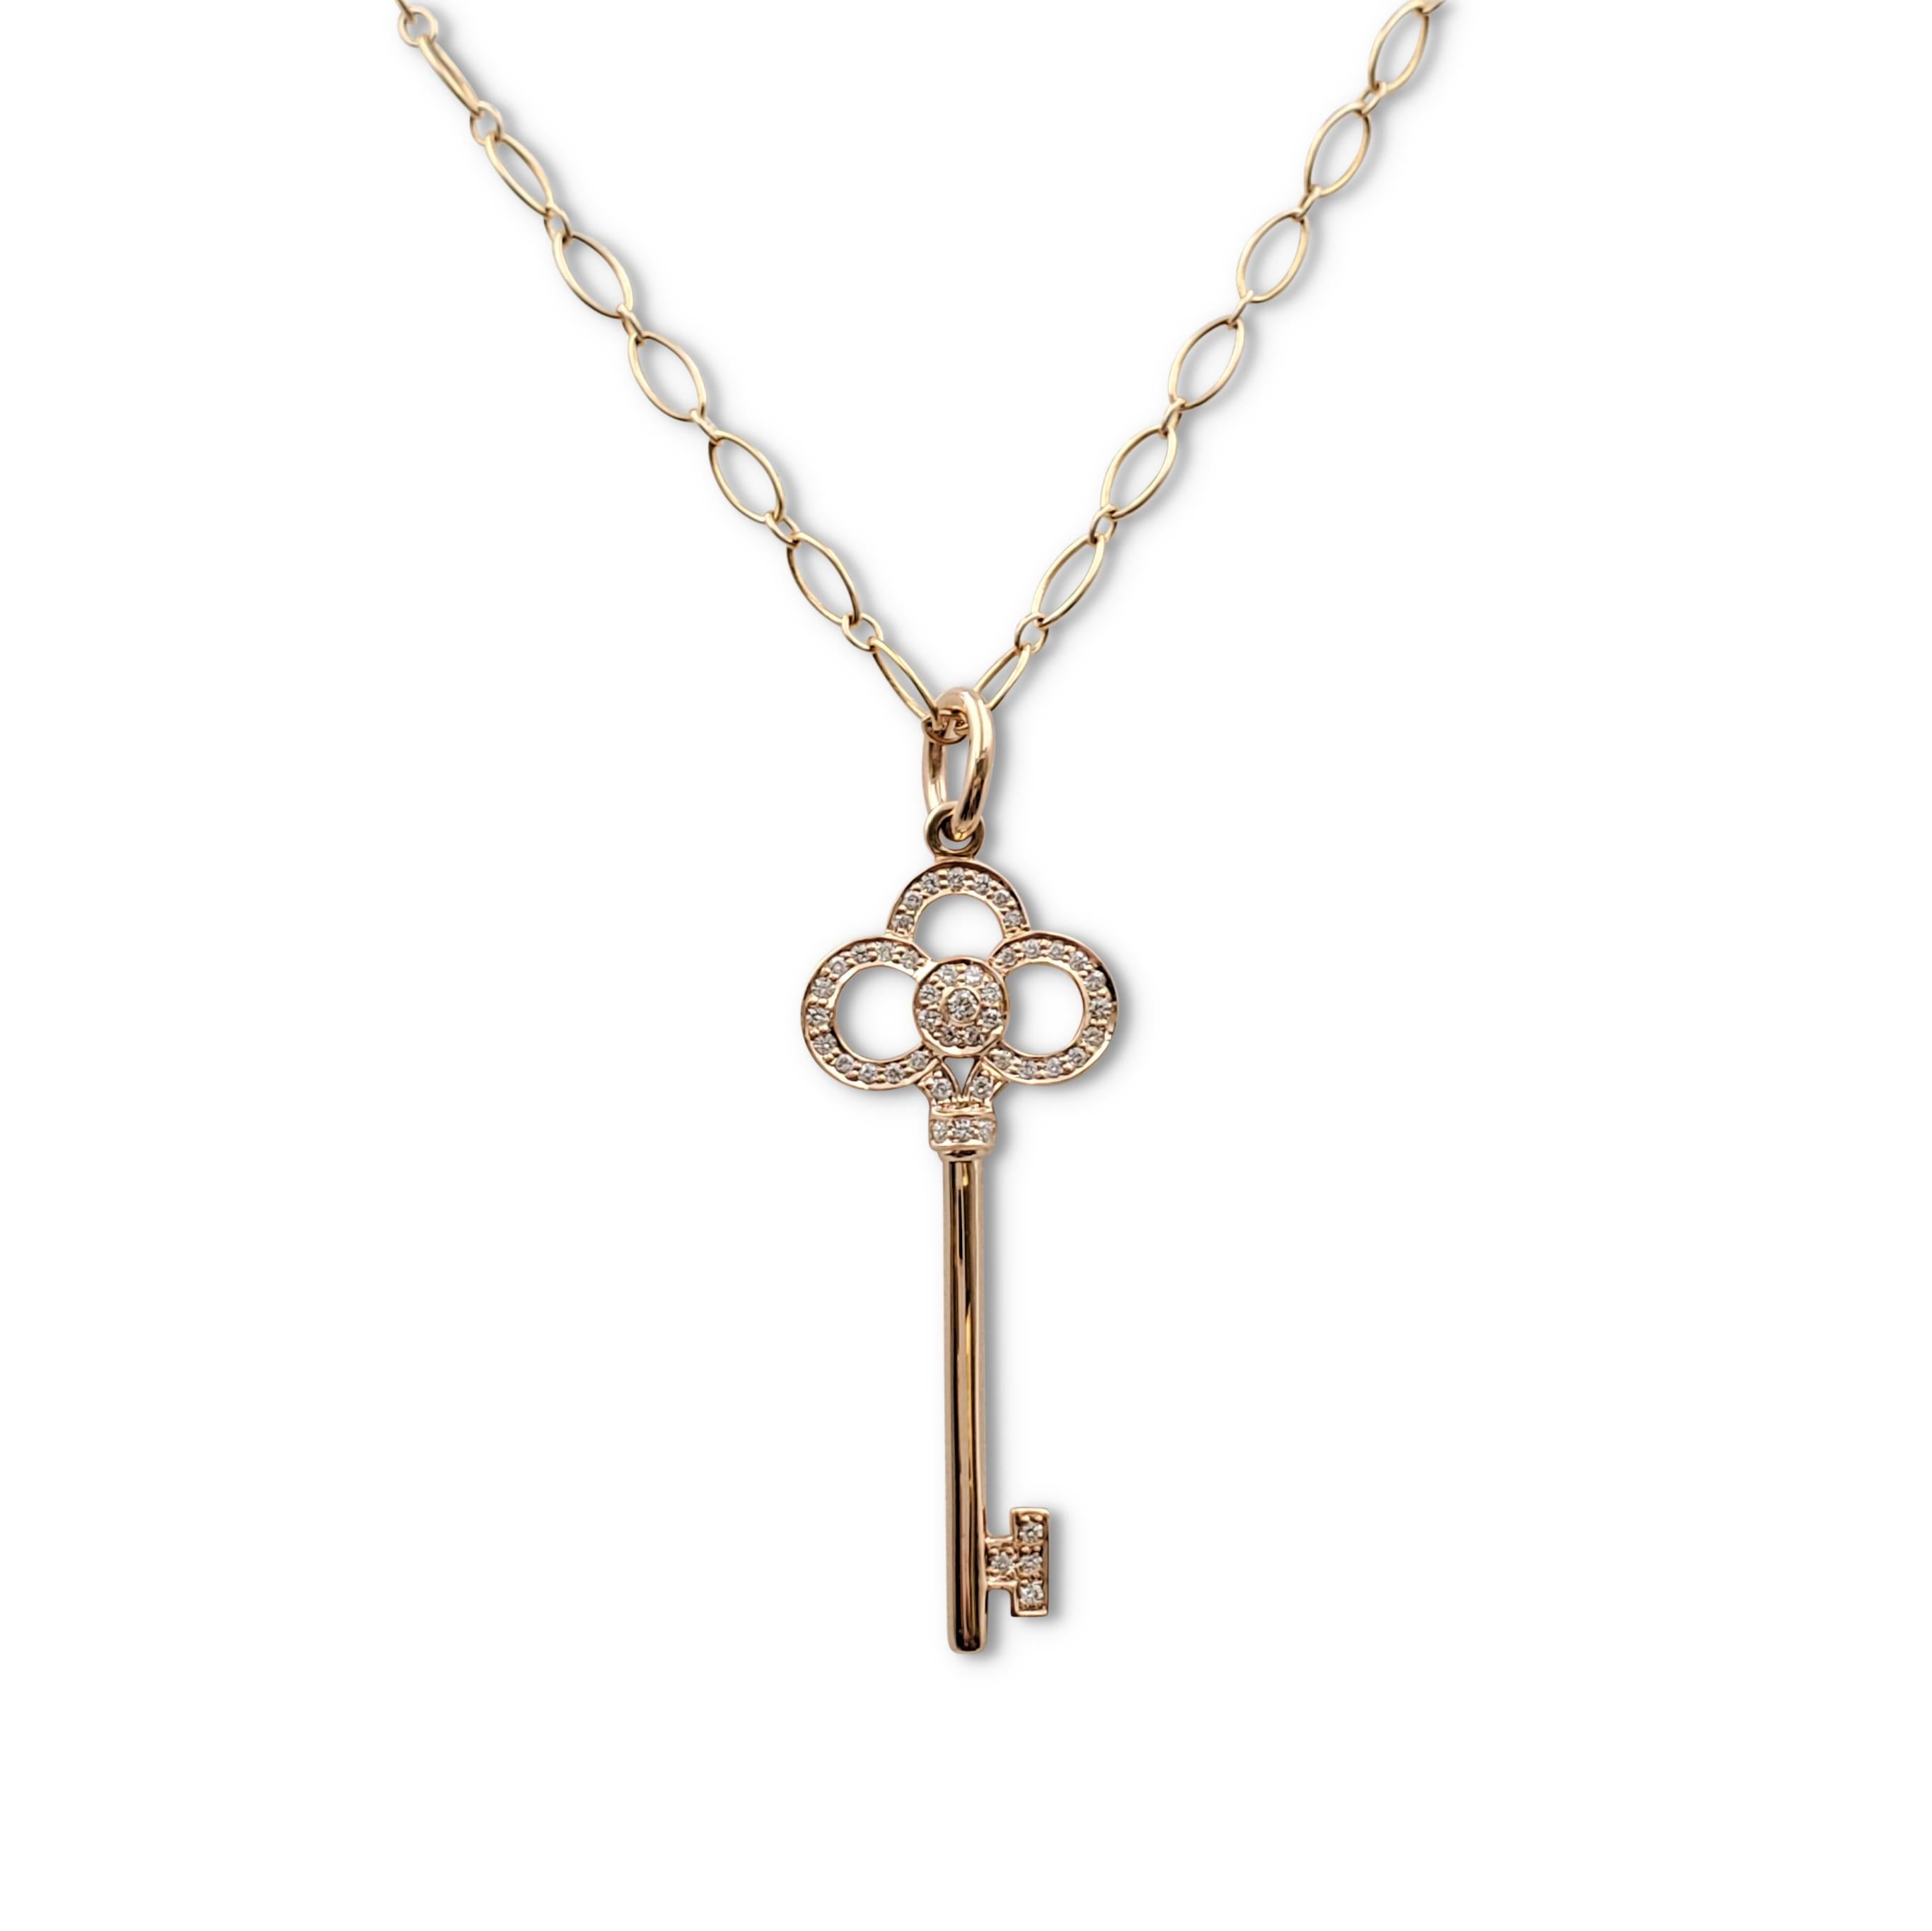 Authentic Tiffany & Co. 'Crown Key' pendant crafted in 18 karat rose gold and set with an estimated 0.13 carats of round brilliant cut diamonds (E-F, VS). The pendant hangs from a Tiffany & Co. oval-link chain necklace crafted in 18 karat rose gold